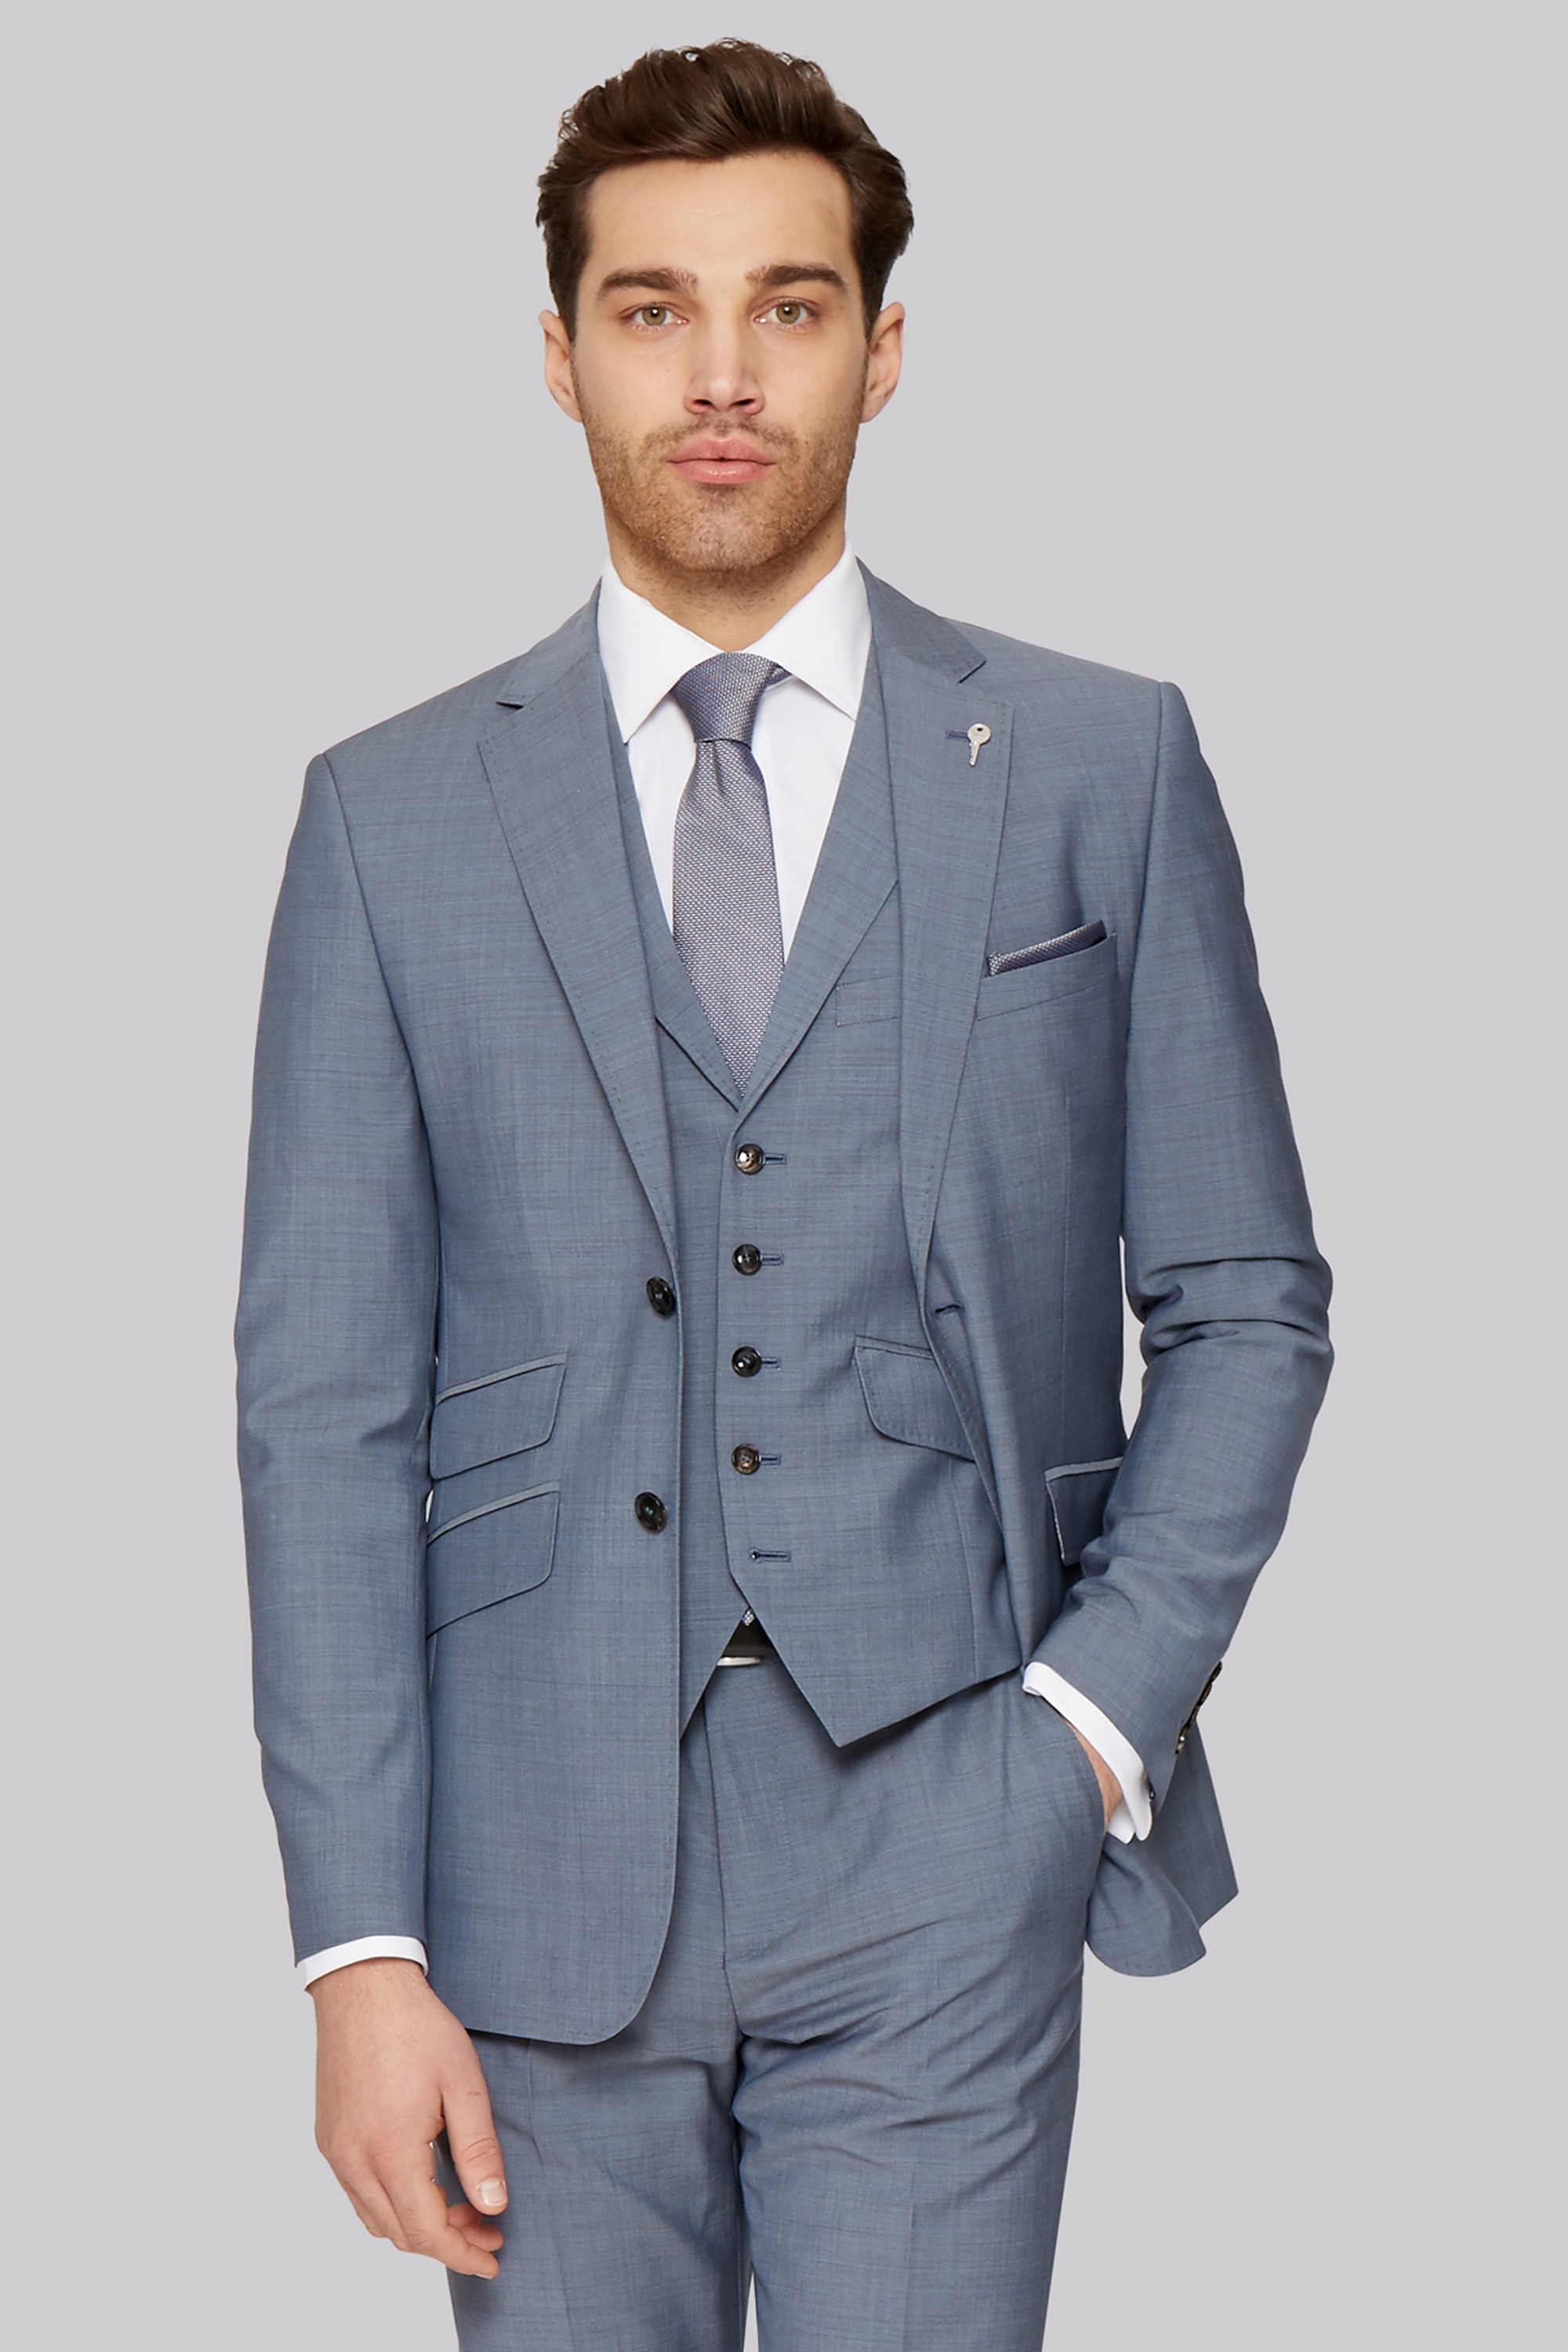 Ted Baker Tailored Fit Light Blue Jacket | Buy Online at Moss